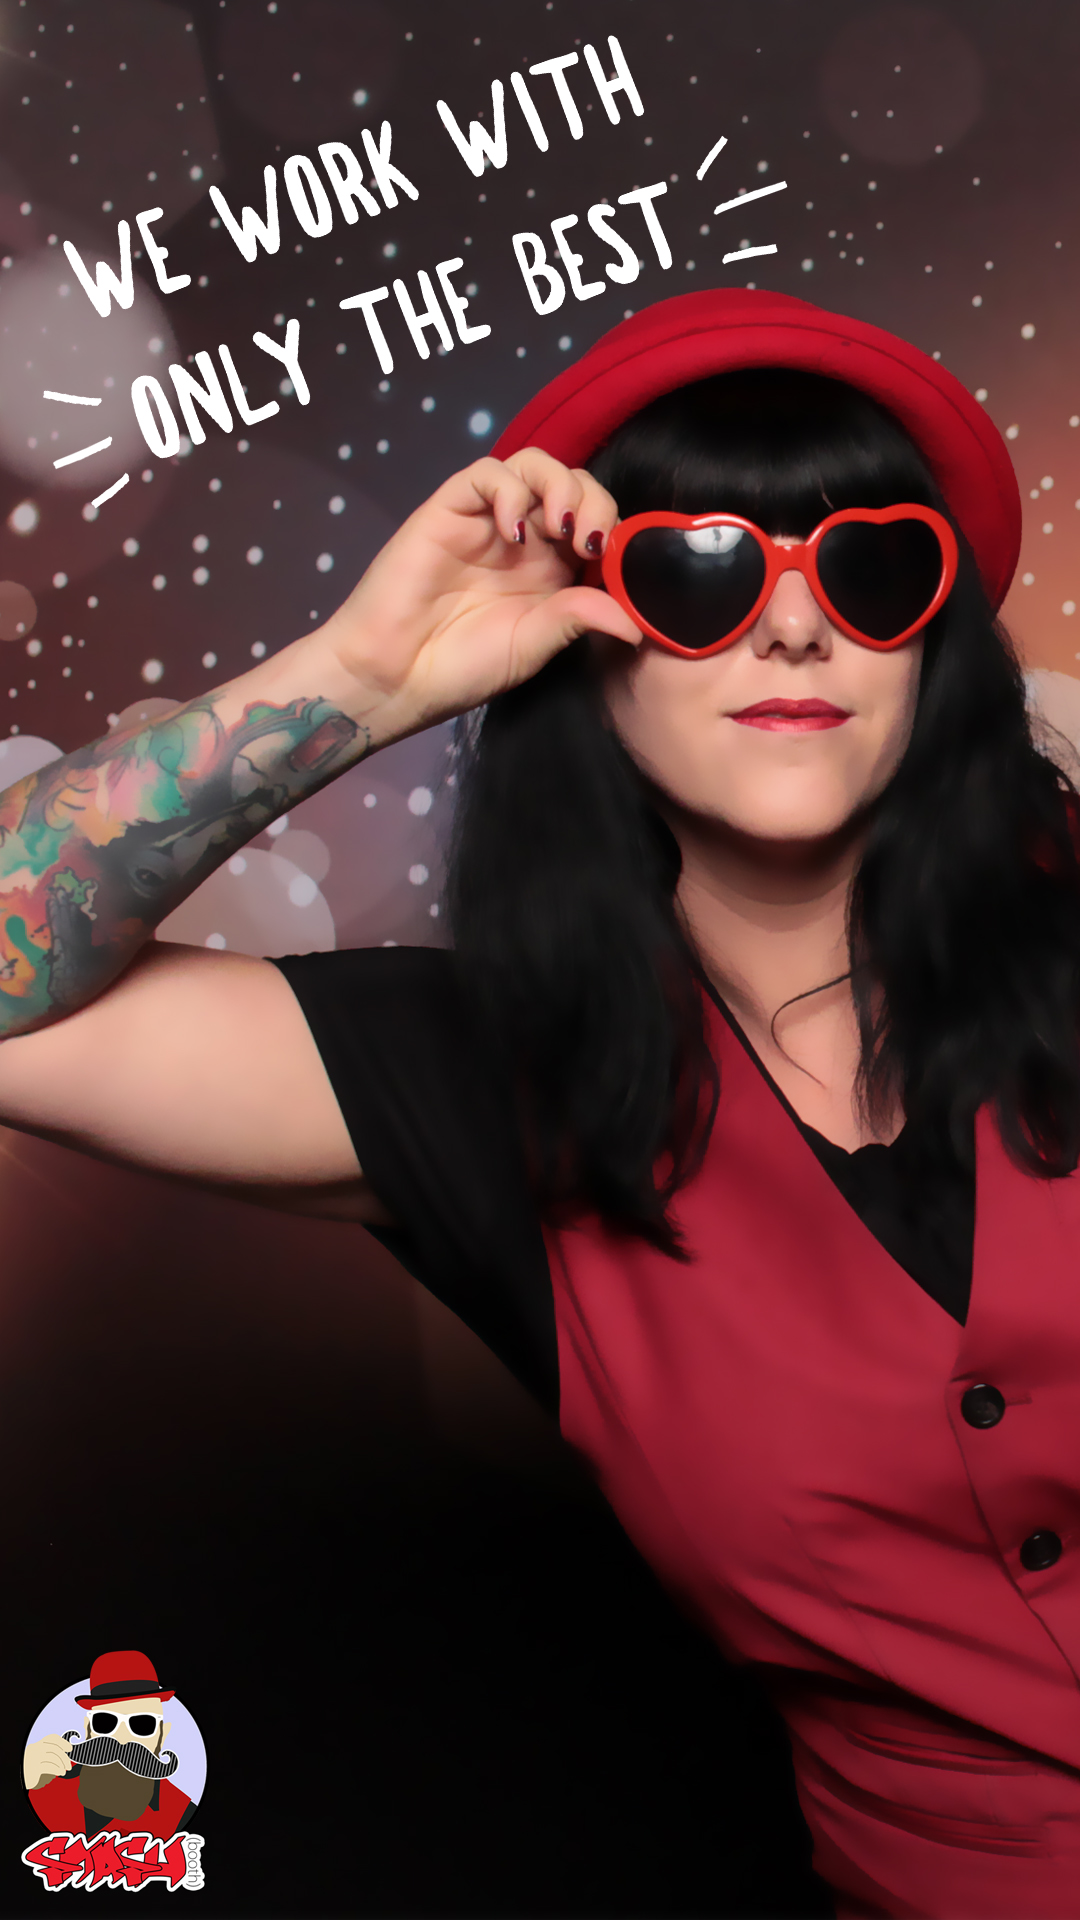 Smashbooth employee with red sunglasses and vest